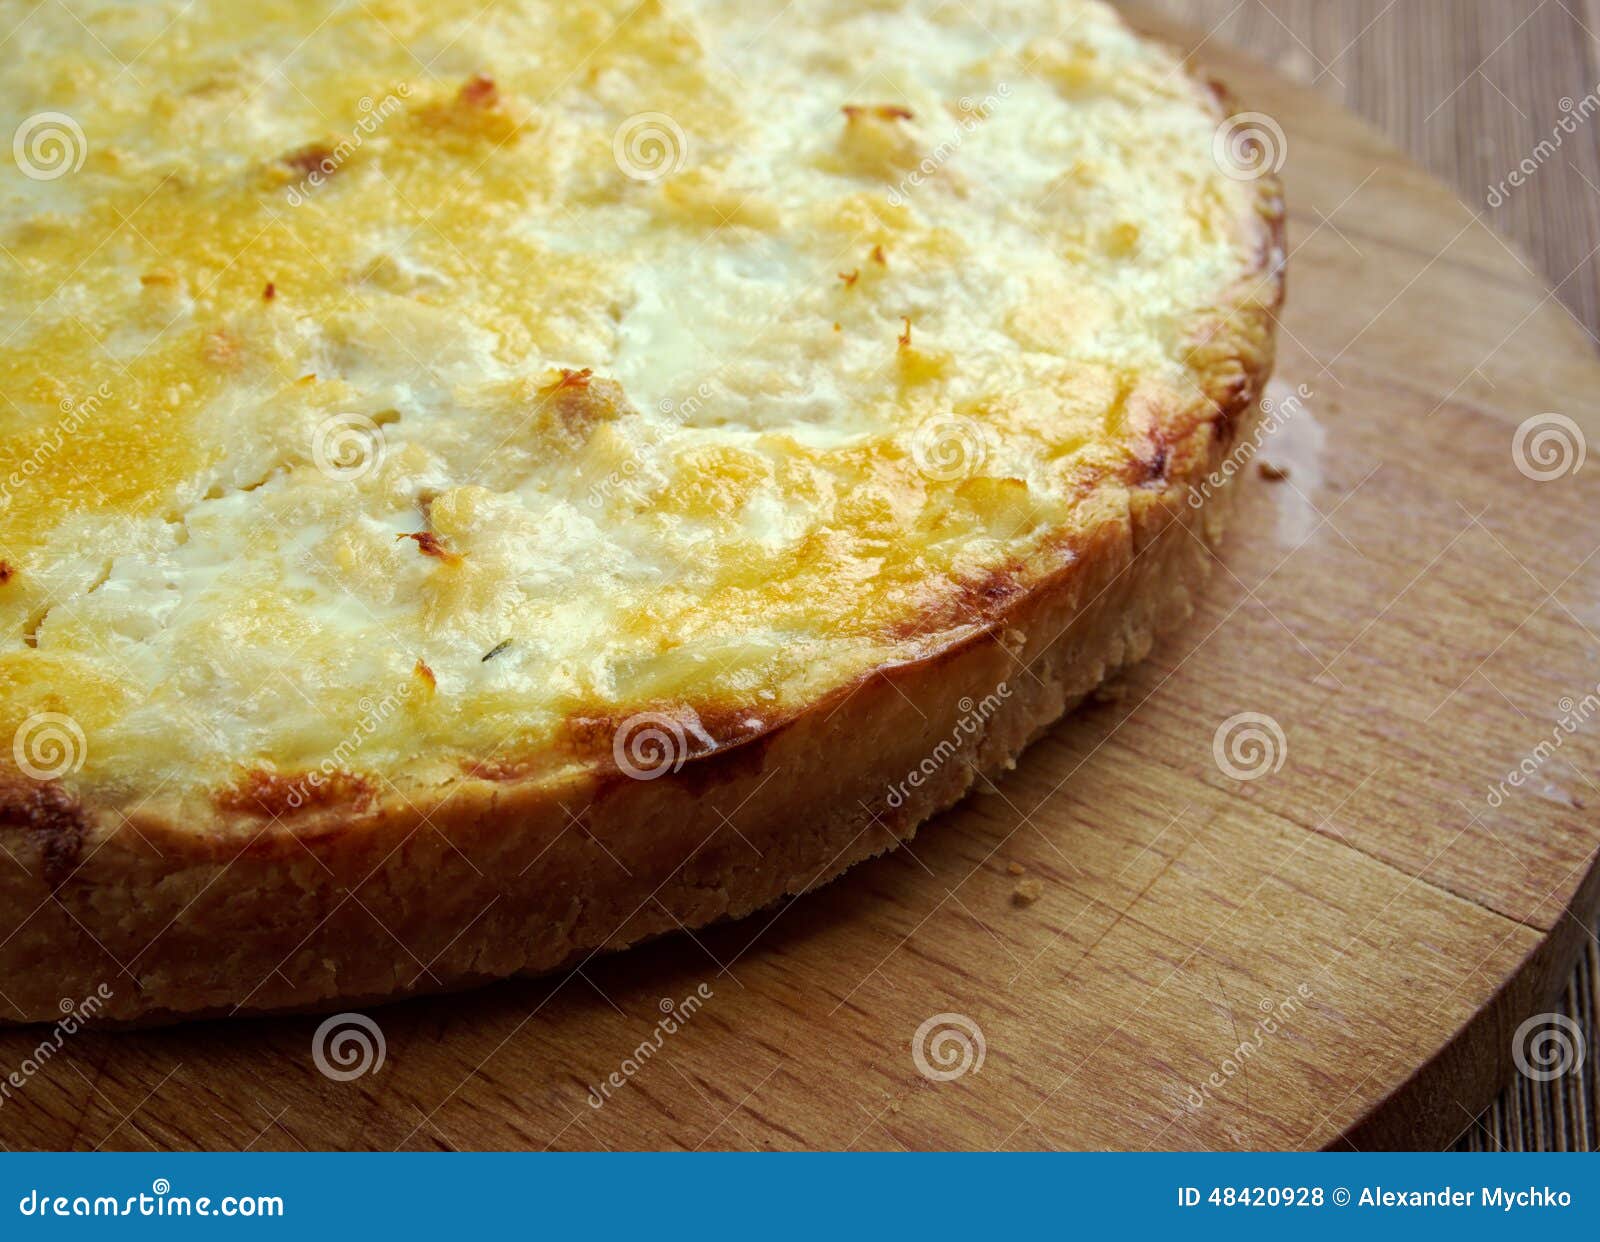 Quiche with cod stock photo. Image of french, sause, snack - 48420928